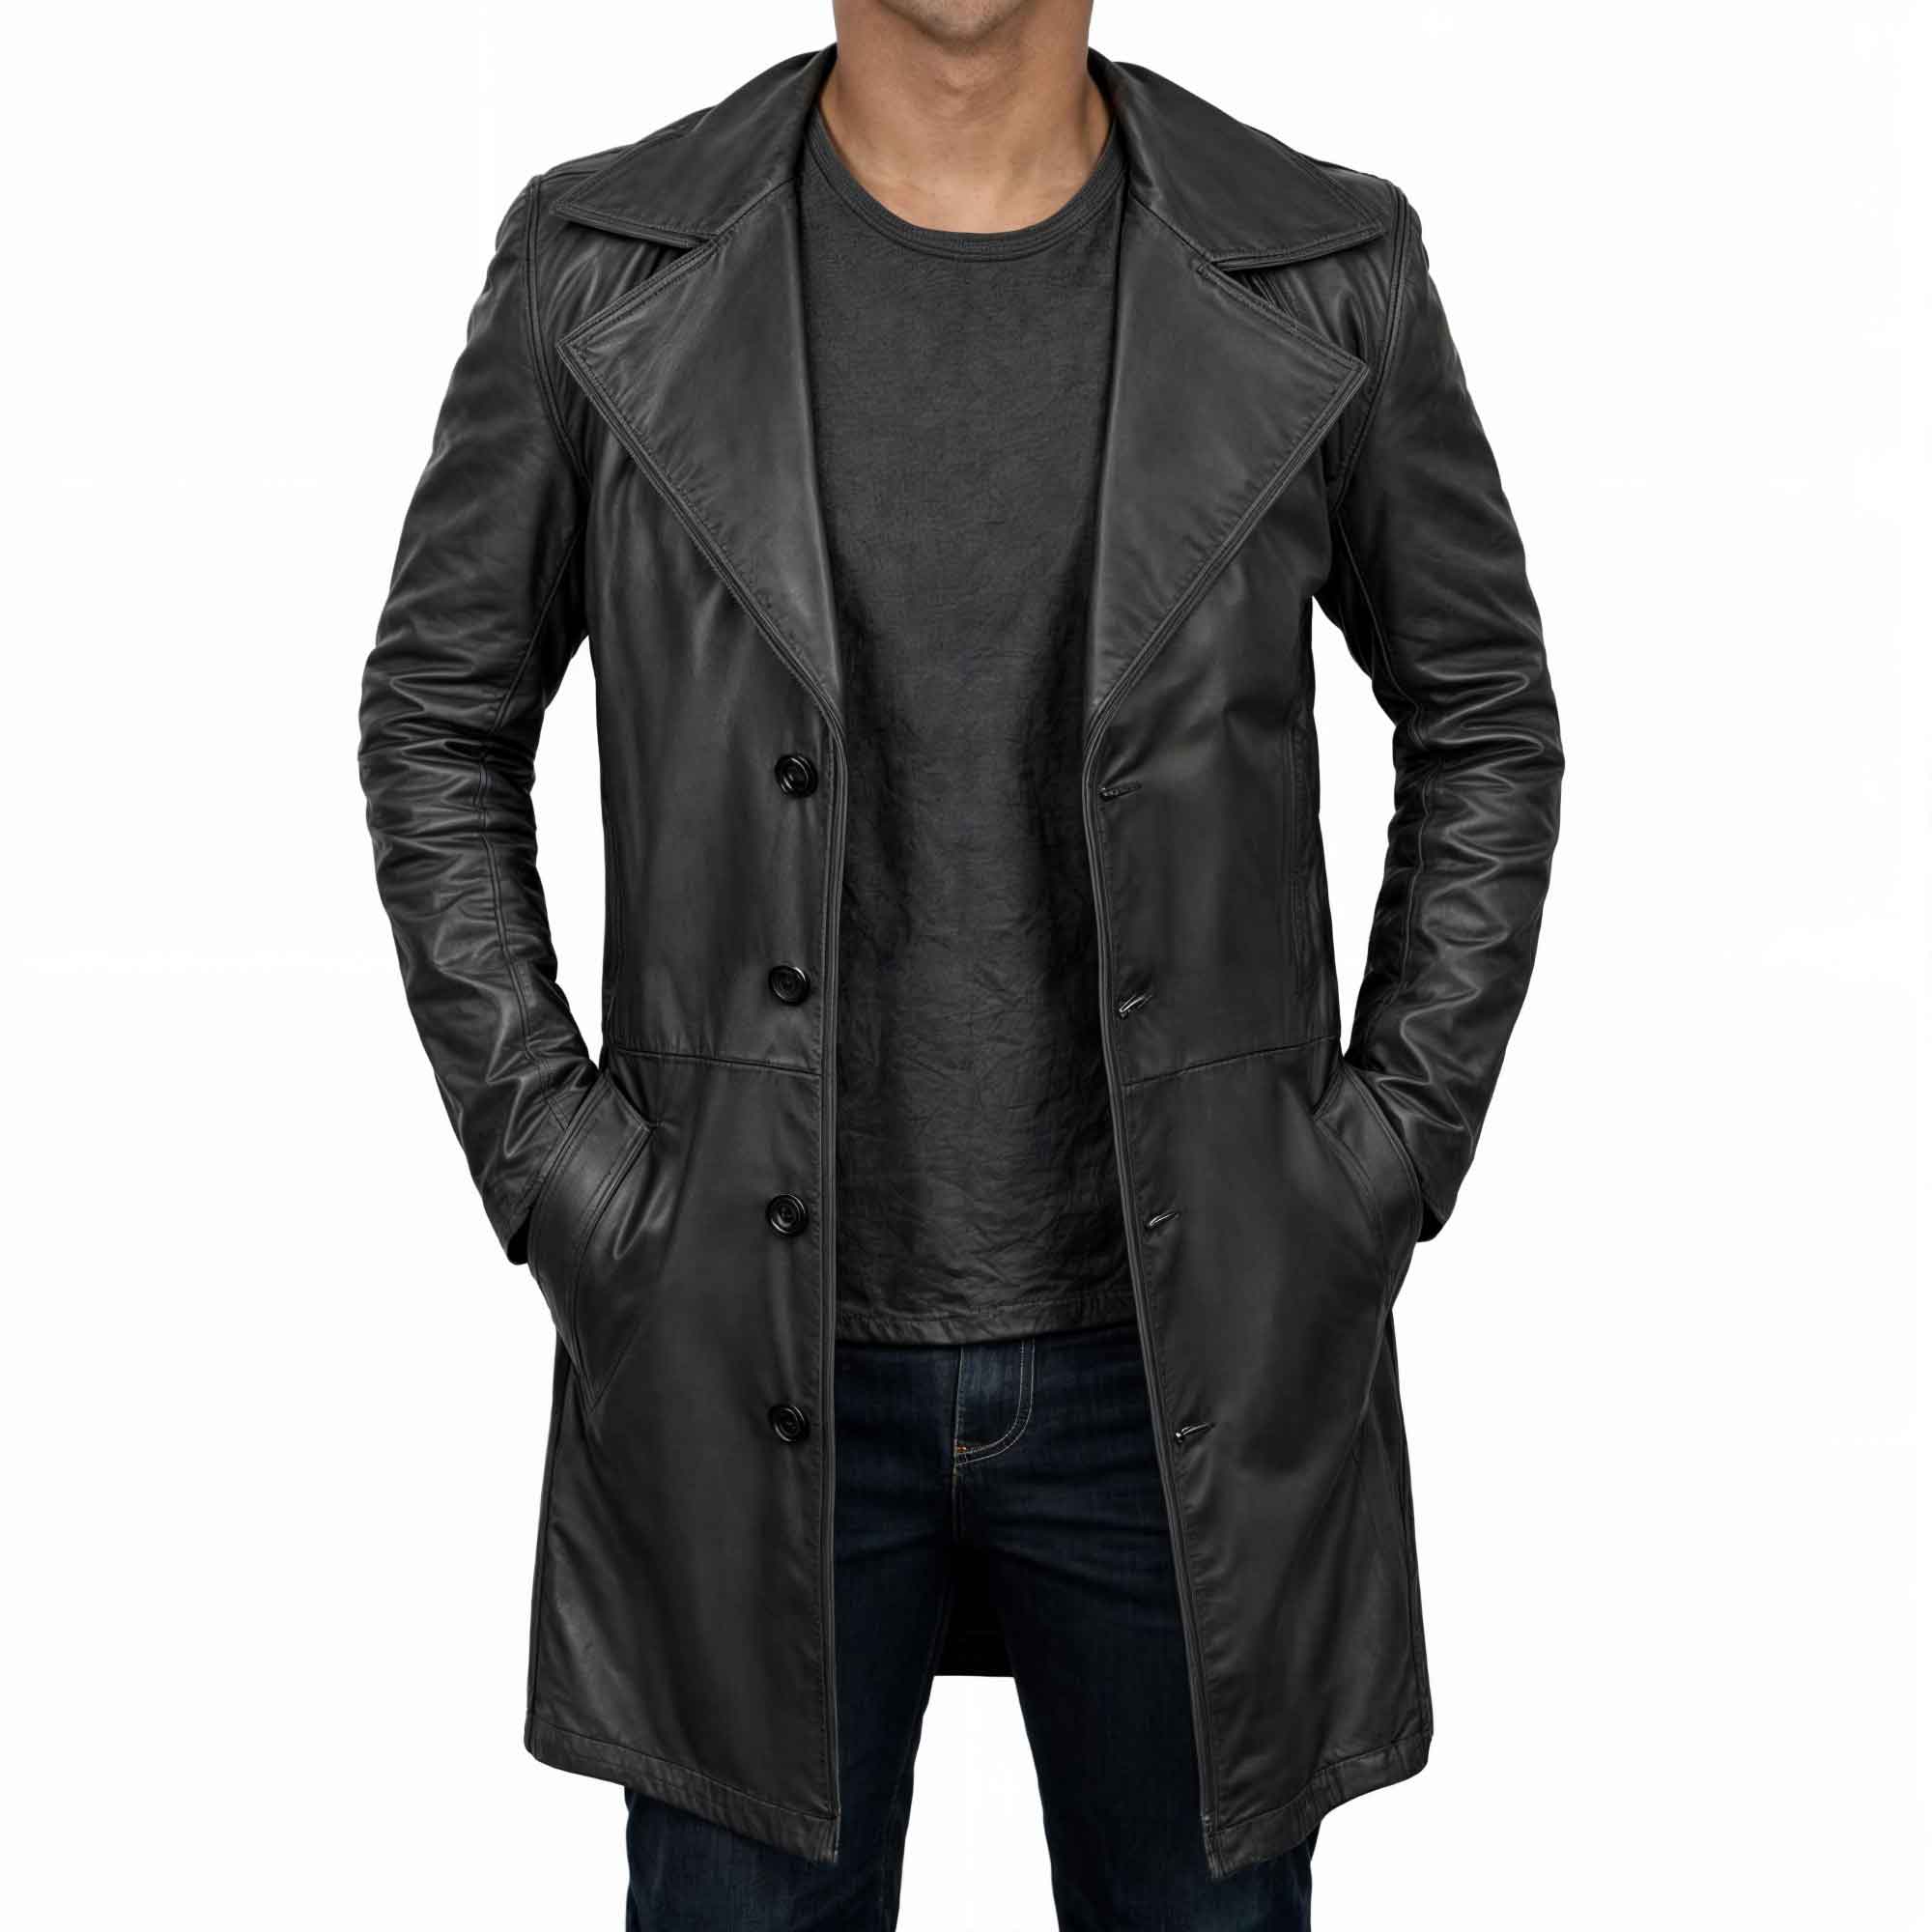 Men's Black Leather Trench Coat Full Length - Duster Trench Coat Front View